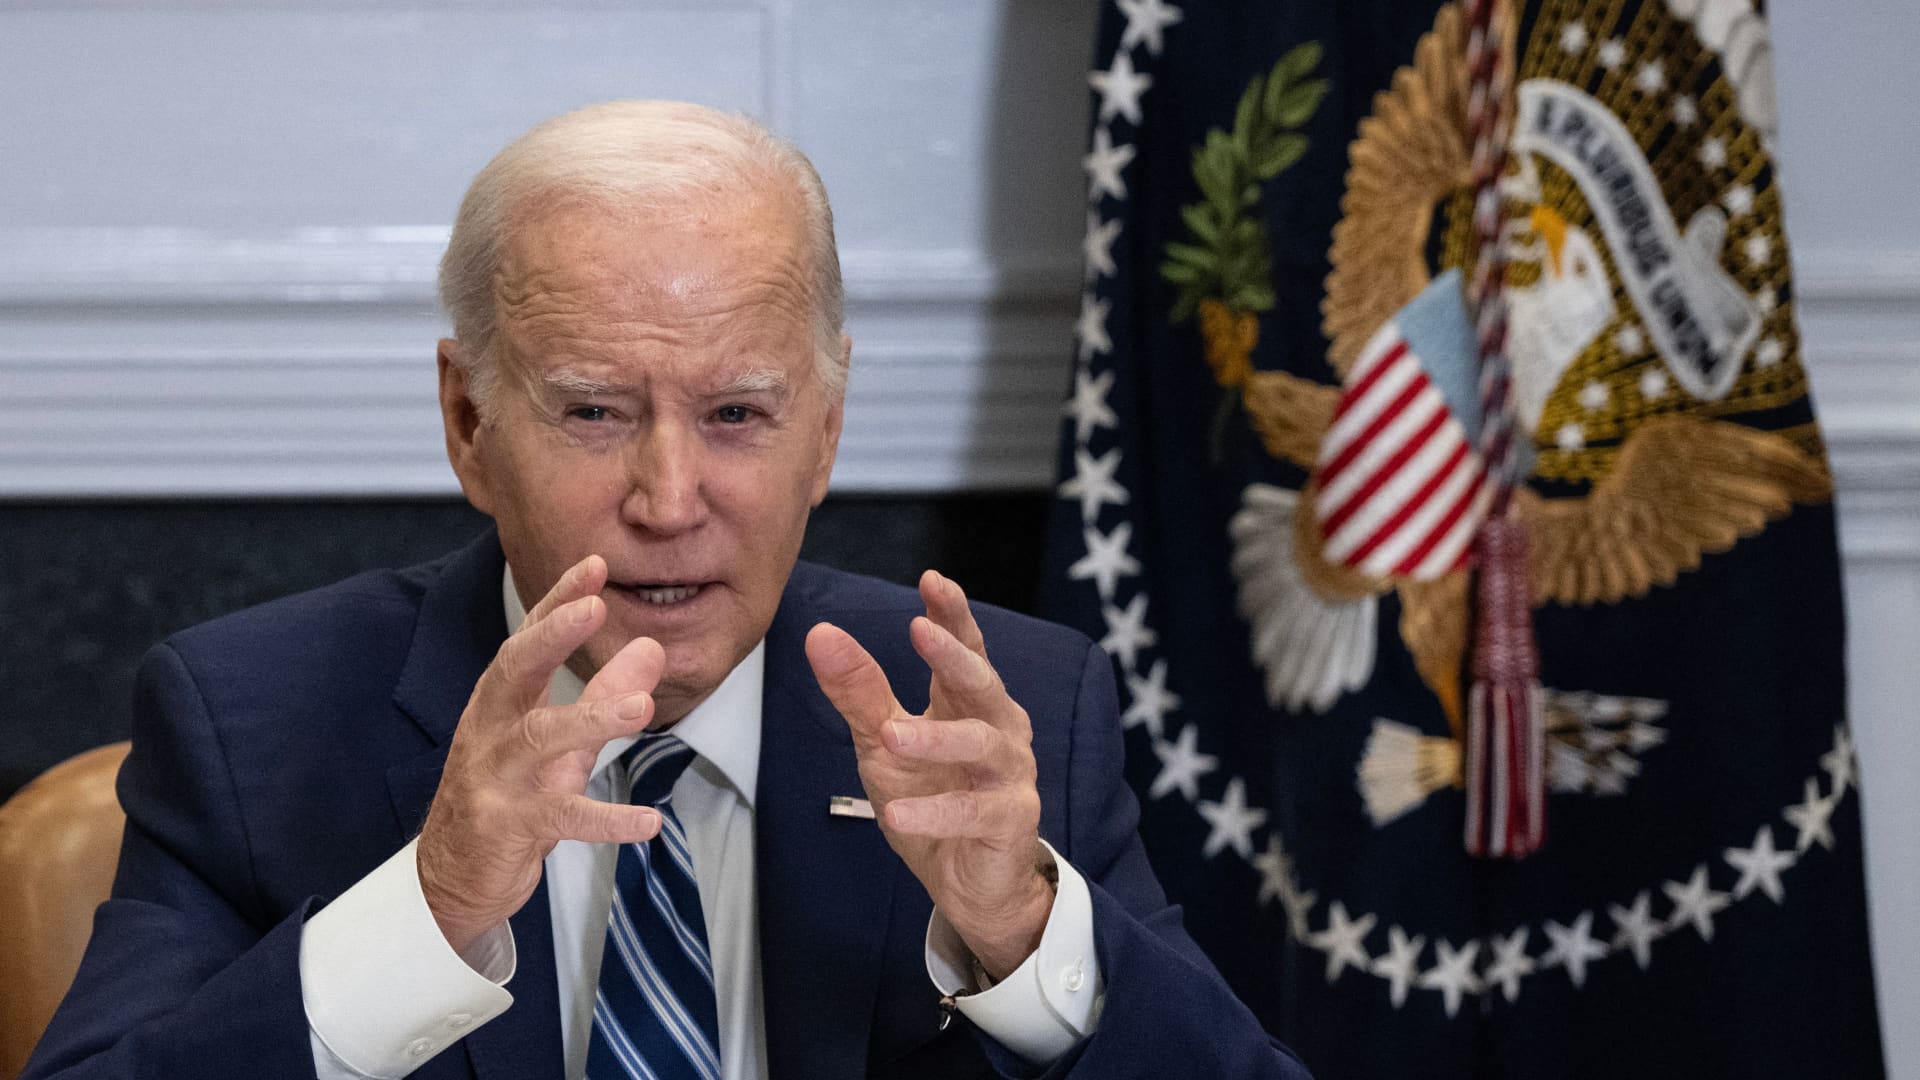 Biden proposes ban on cable cord cutting fees